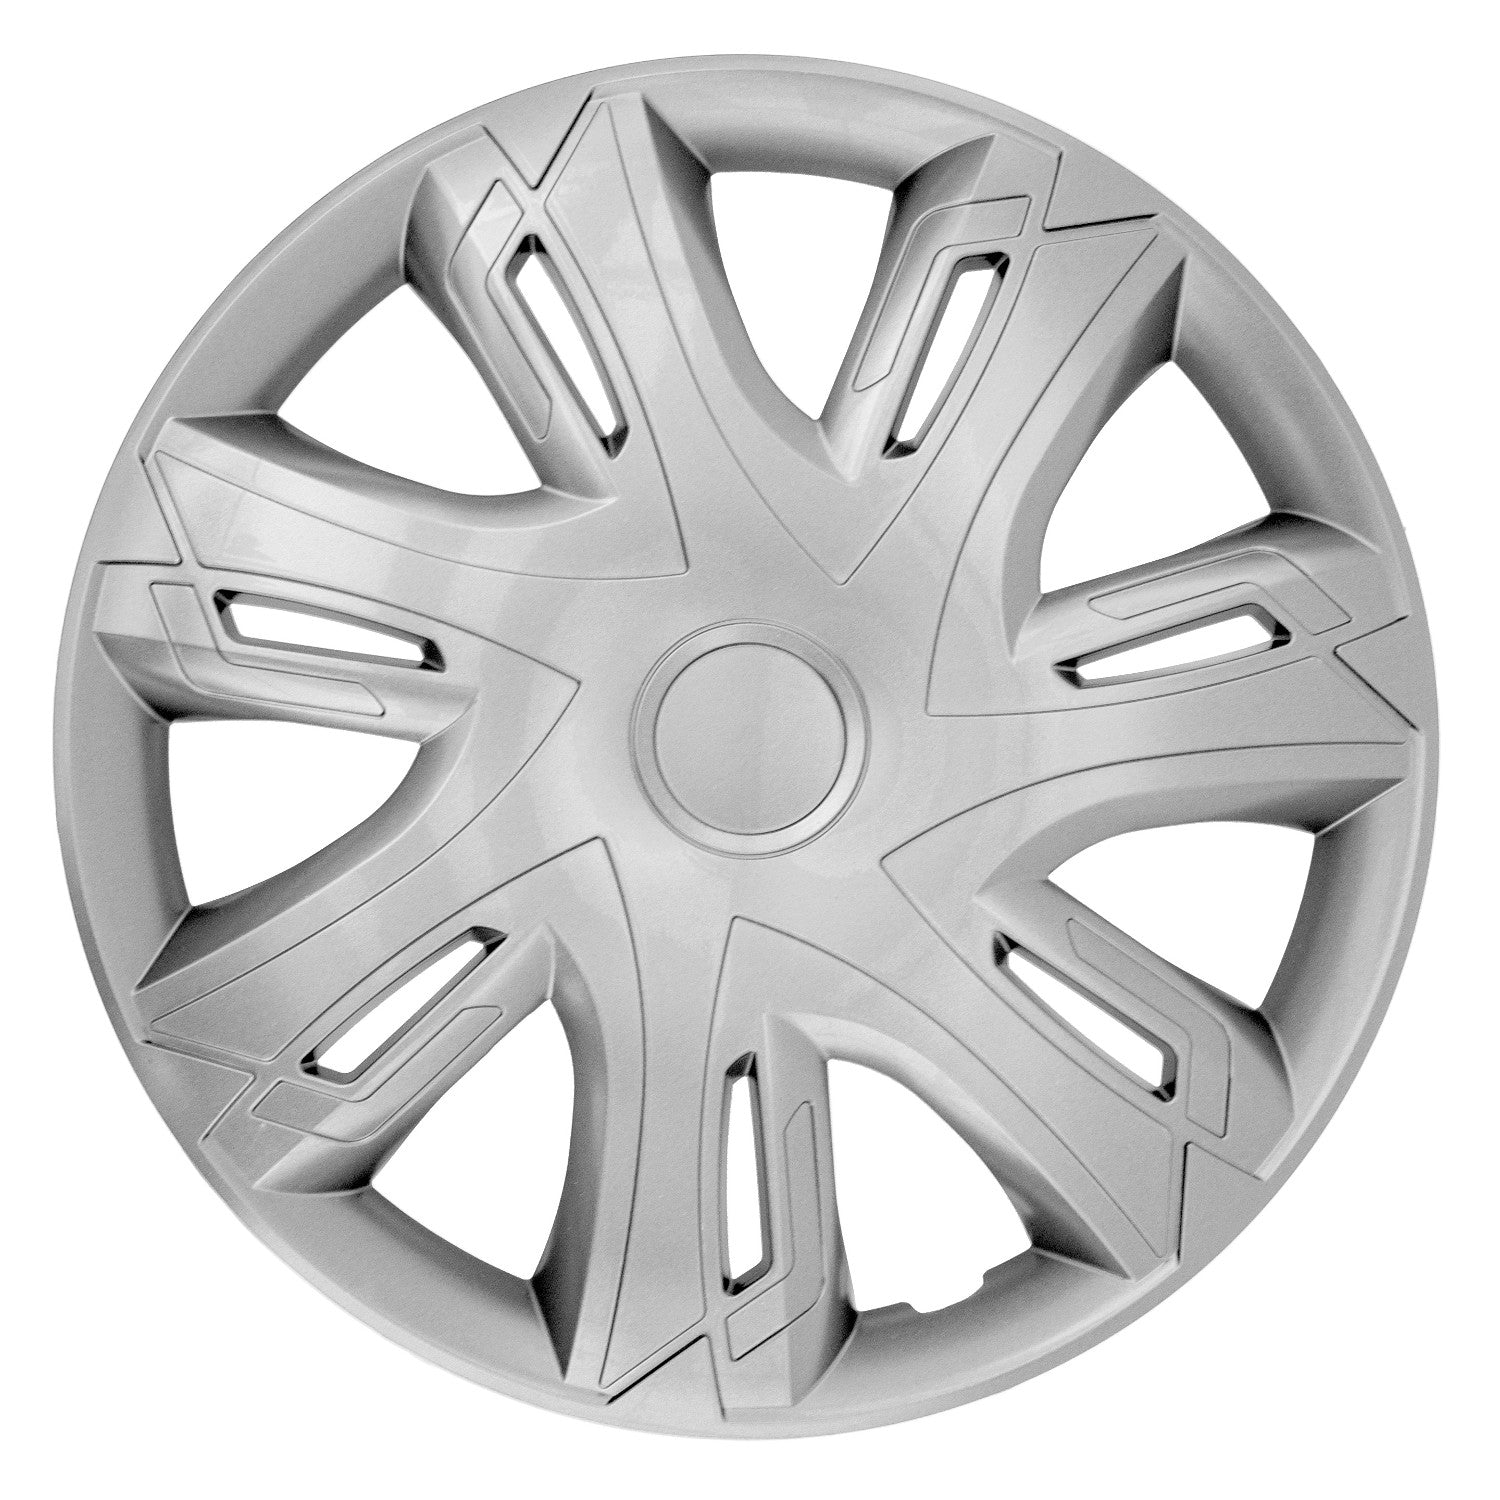 Buy Wholesale China New Pp Chrome Hubcaps Rim Cover, 42% OFF